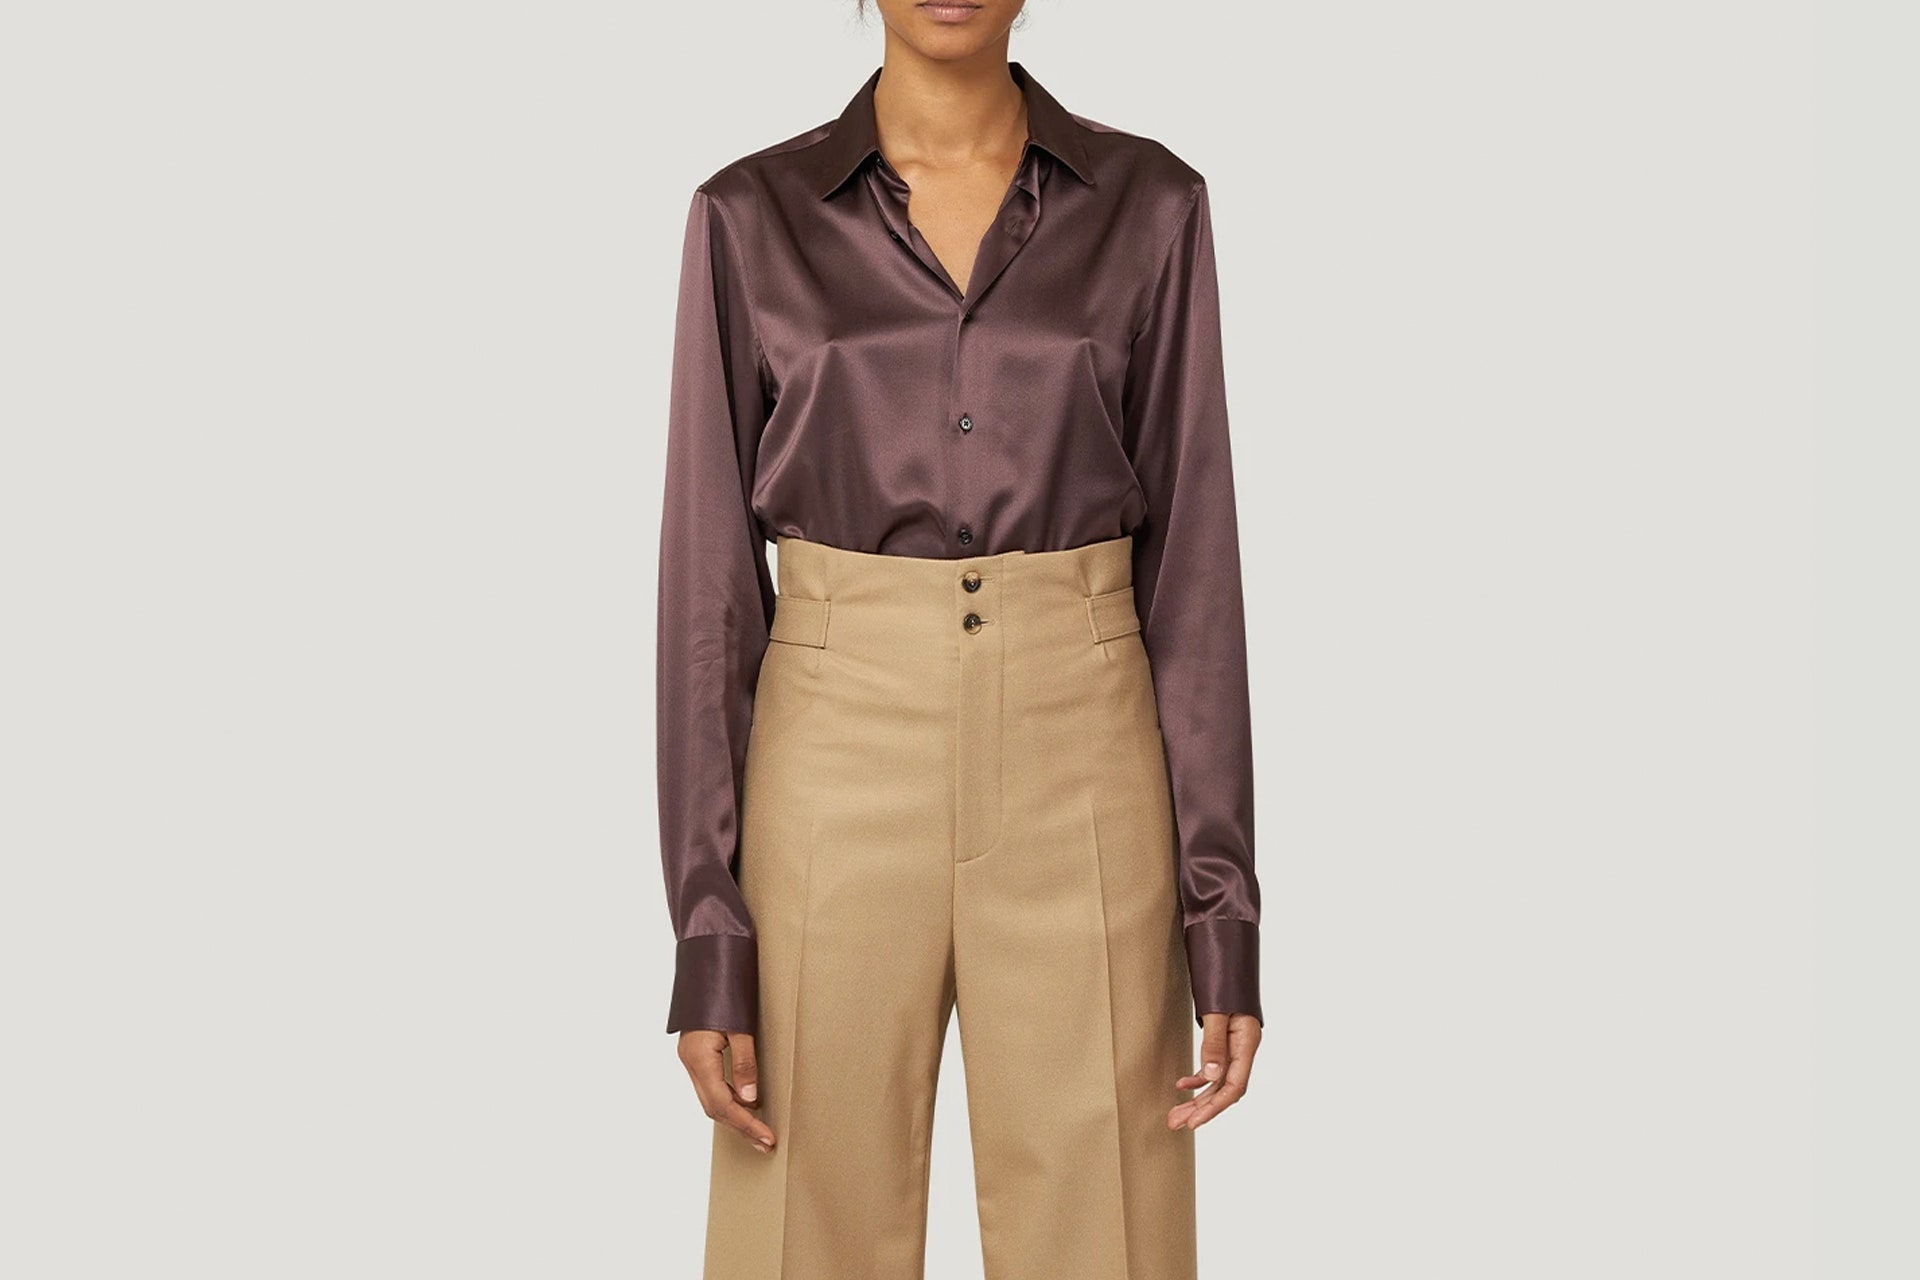 Women's Silk Blouses To Make You Look Expensive Under A Budget